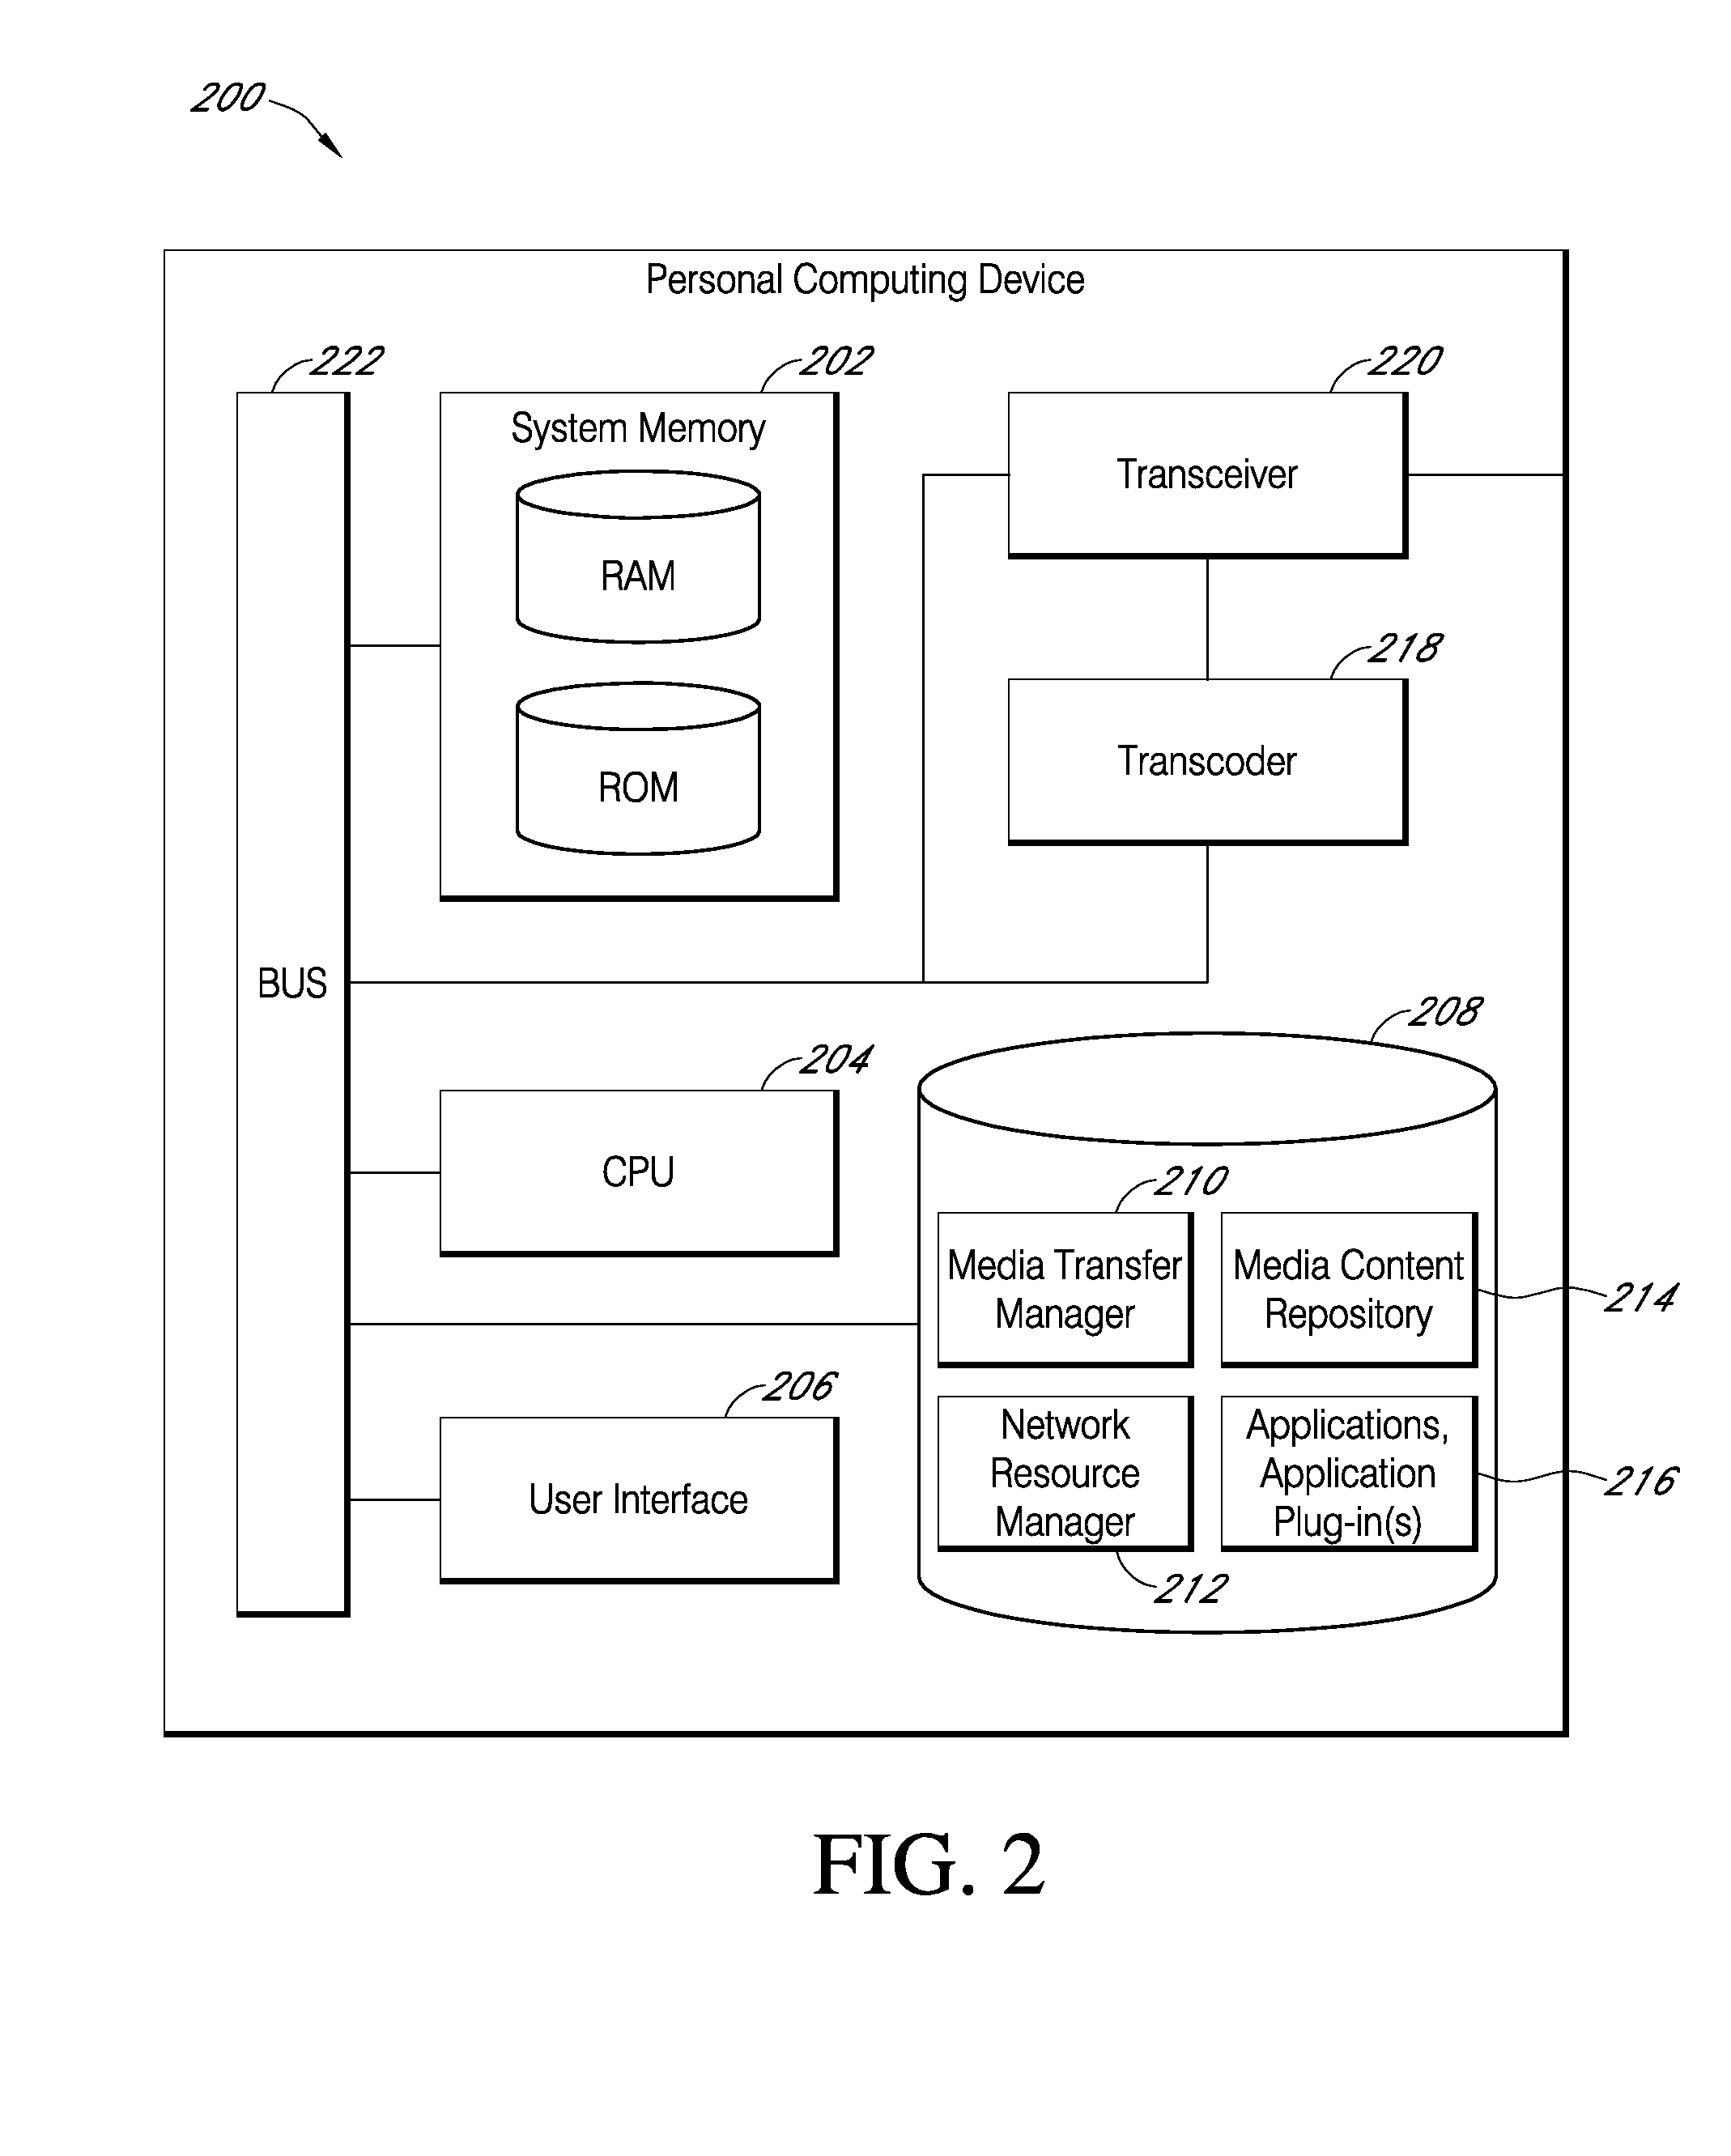 Systems and methods for automatic detection and coordinated delivery of burdensome media content